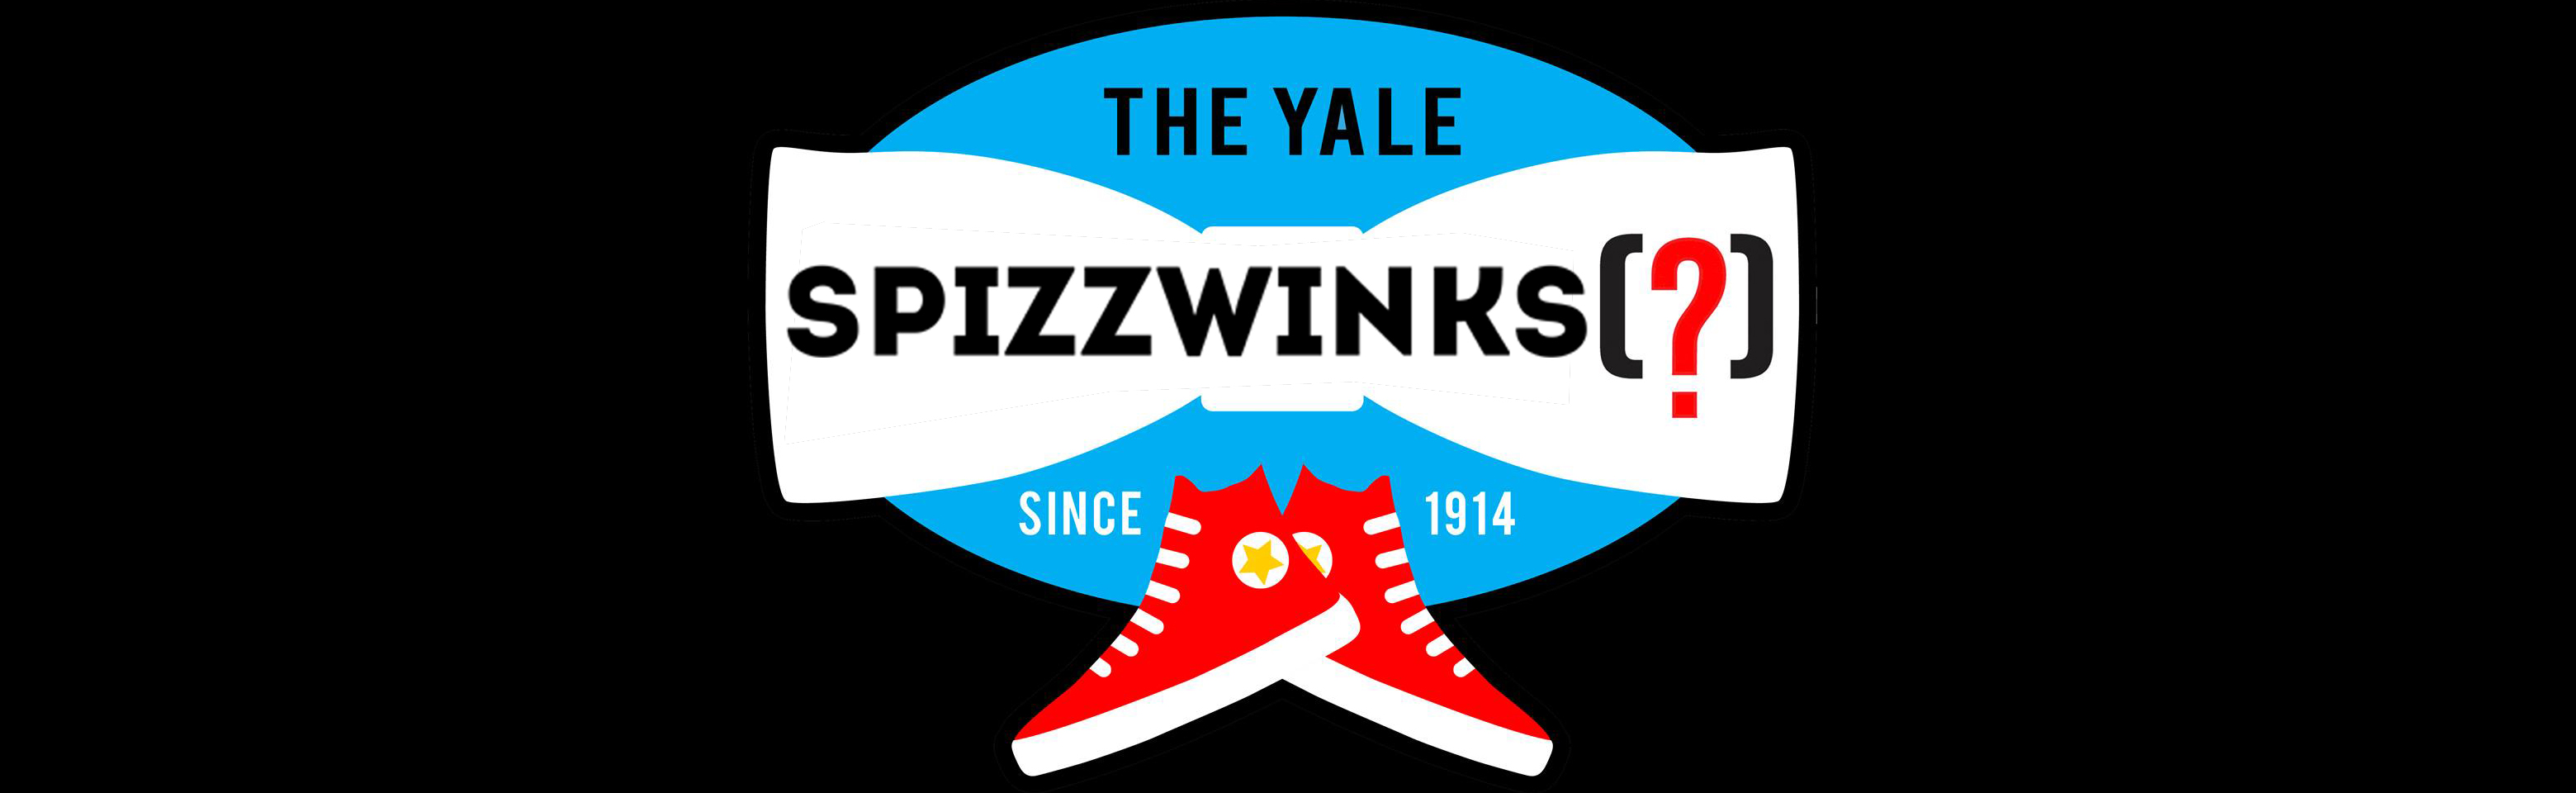 The Yale Spizzwinks [?]